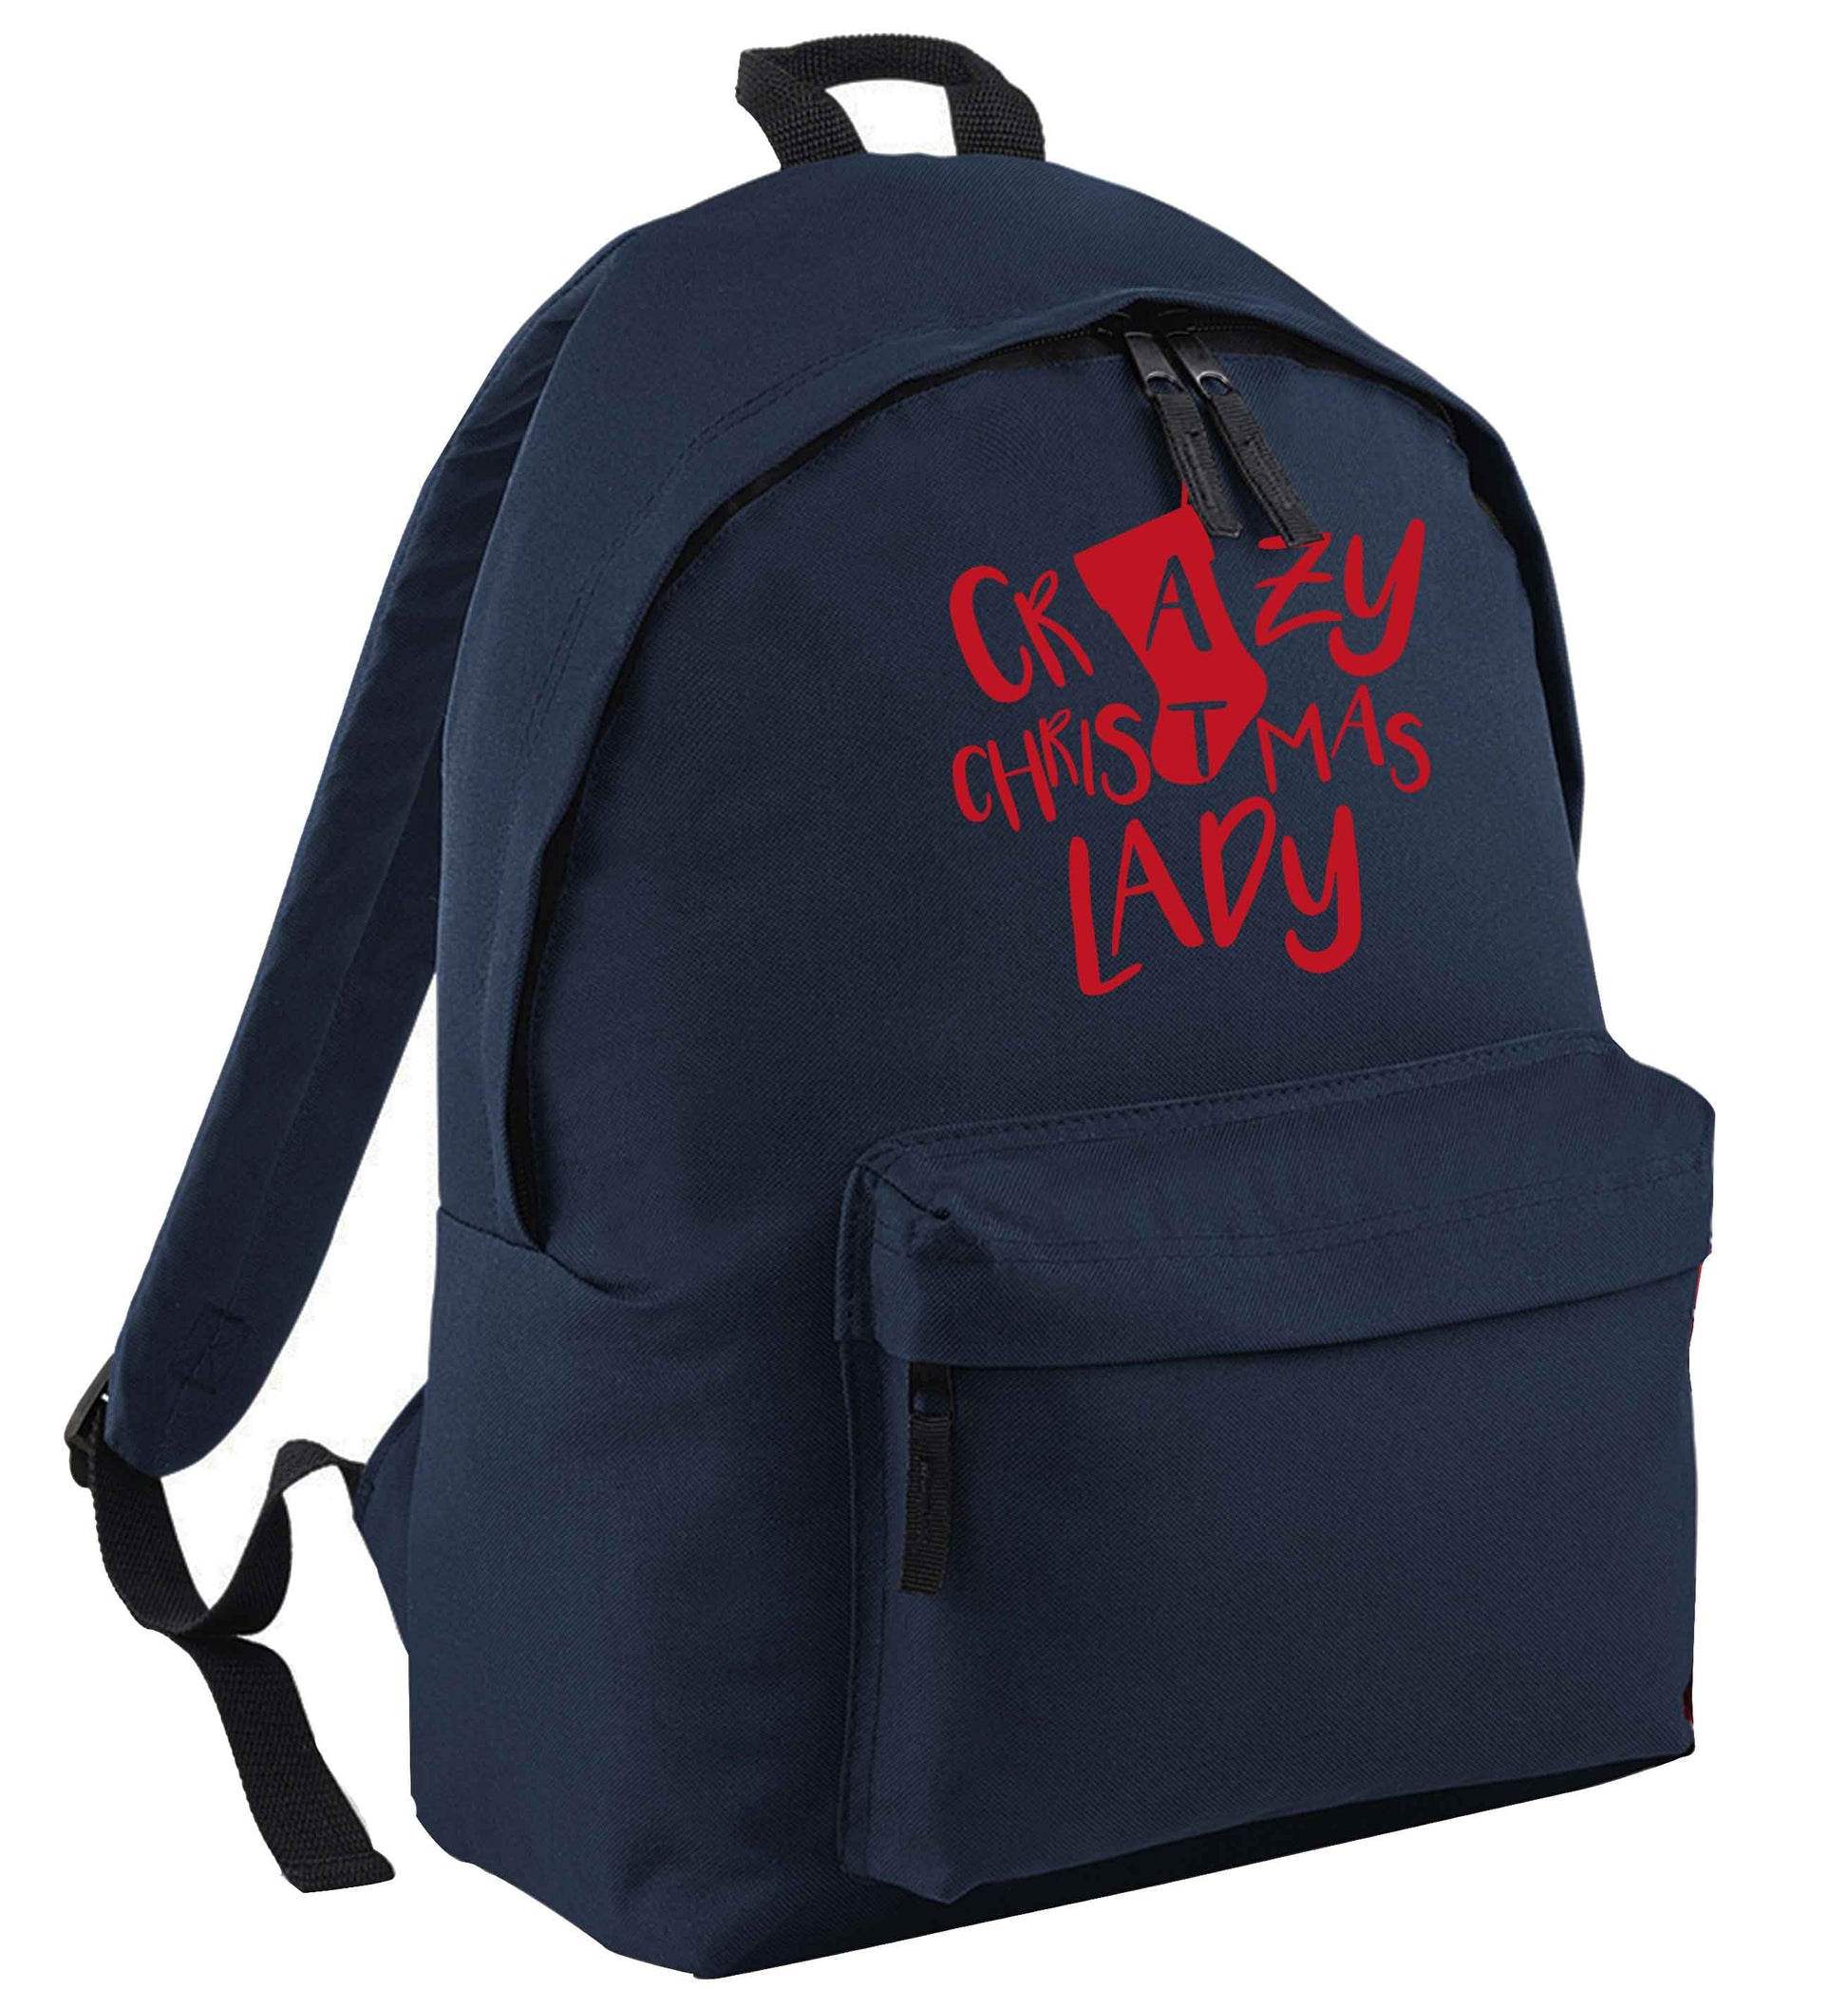 Crazy Christmas Dude navy adults backpack